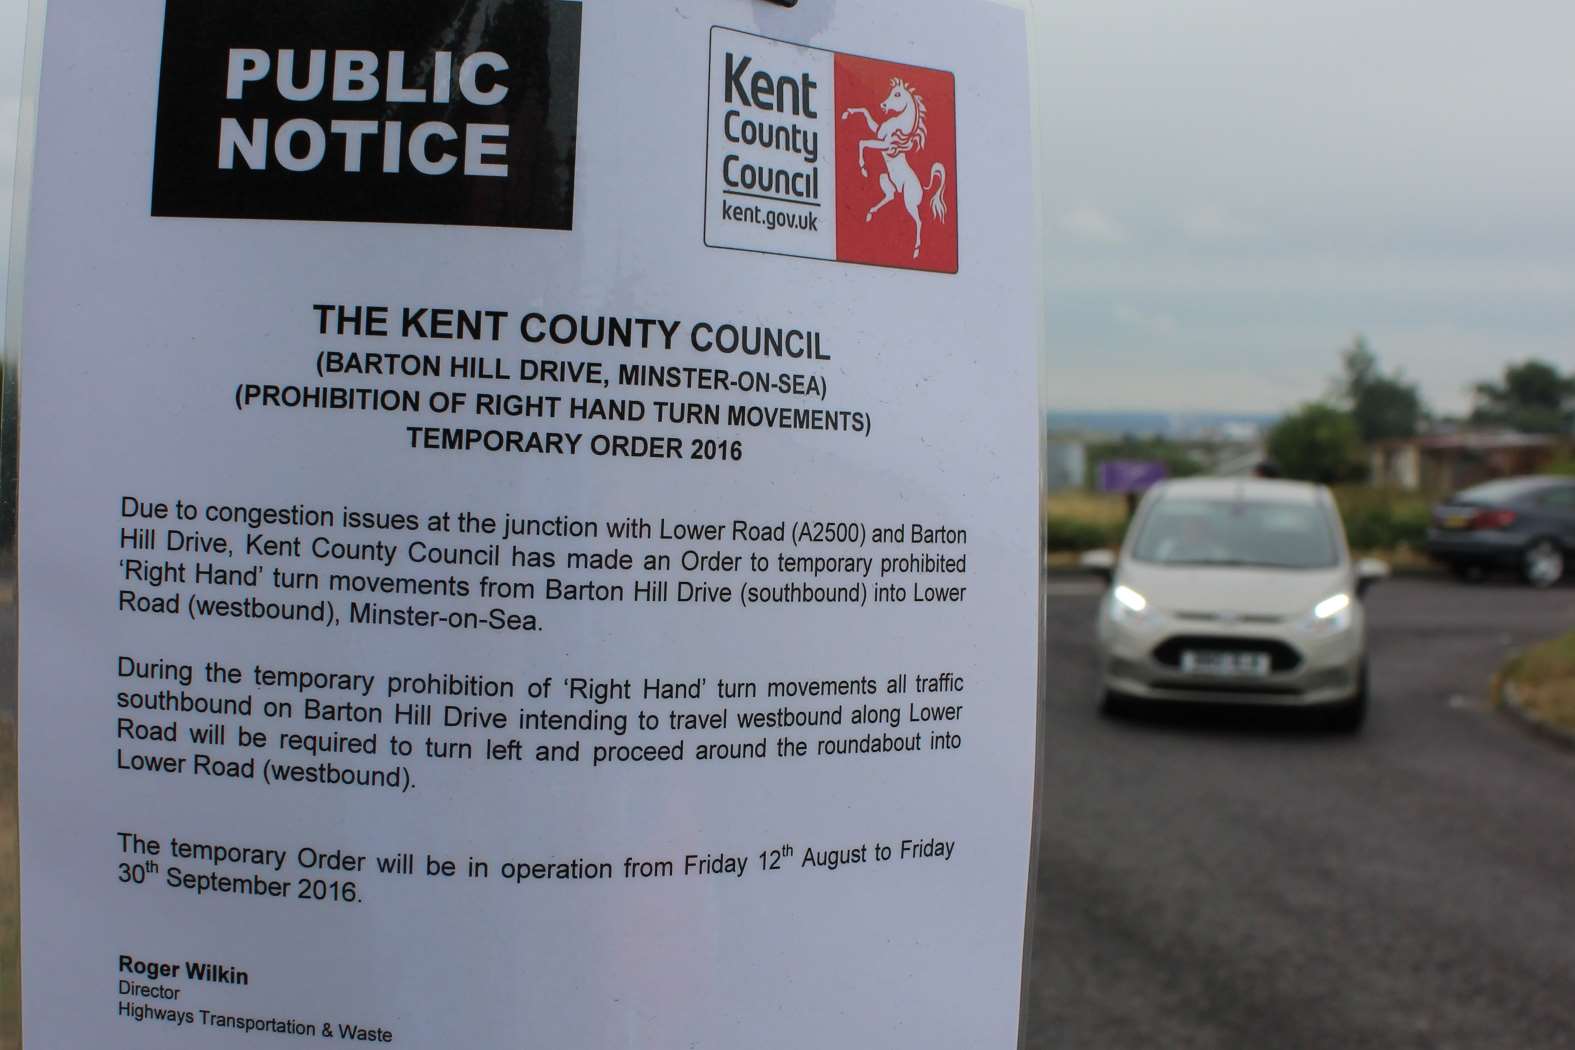 KCC Highways are stopping right turns at Barton Hill Drive, Minster, Sheppey, from Friday August 12